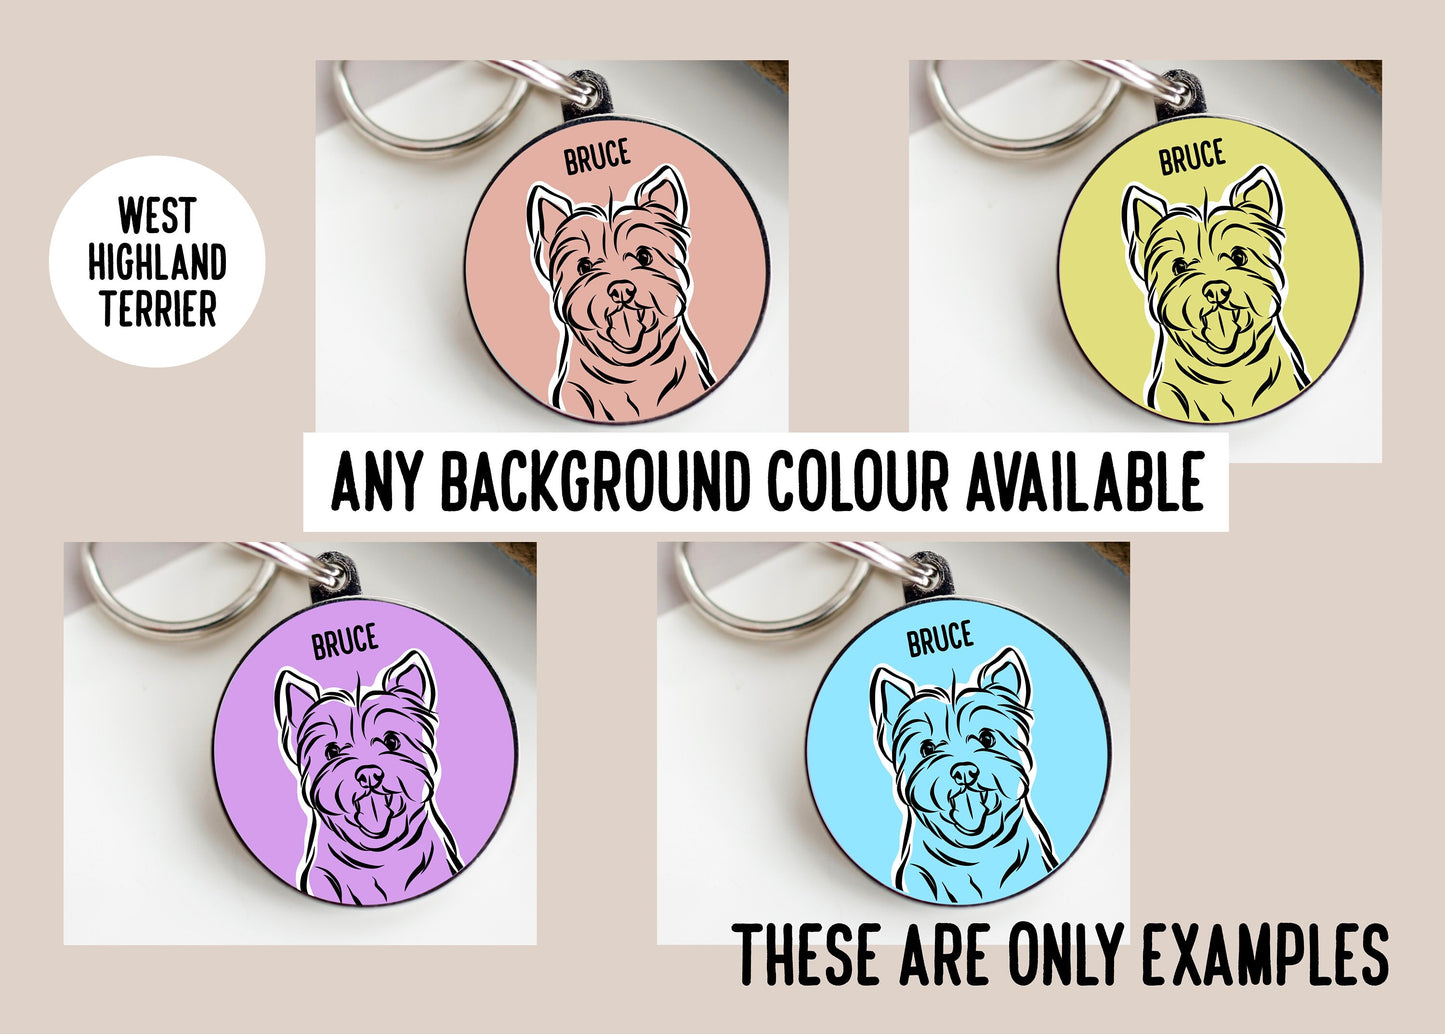 West Highland Terrier ID Tag/ Personalised Westie Outline Face Collar Tag/ Custom Pet Name Identity Tag/ Cute Dog Owner Gift/ Microchip Tag